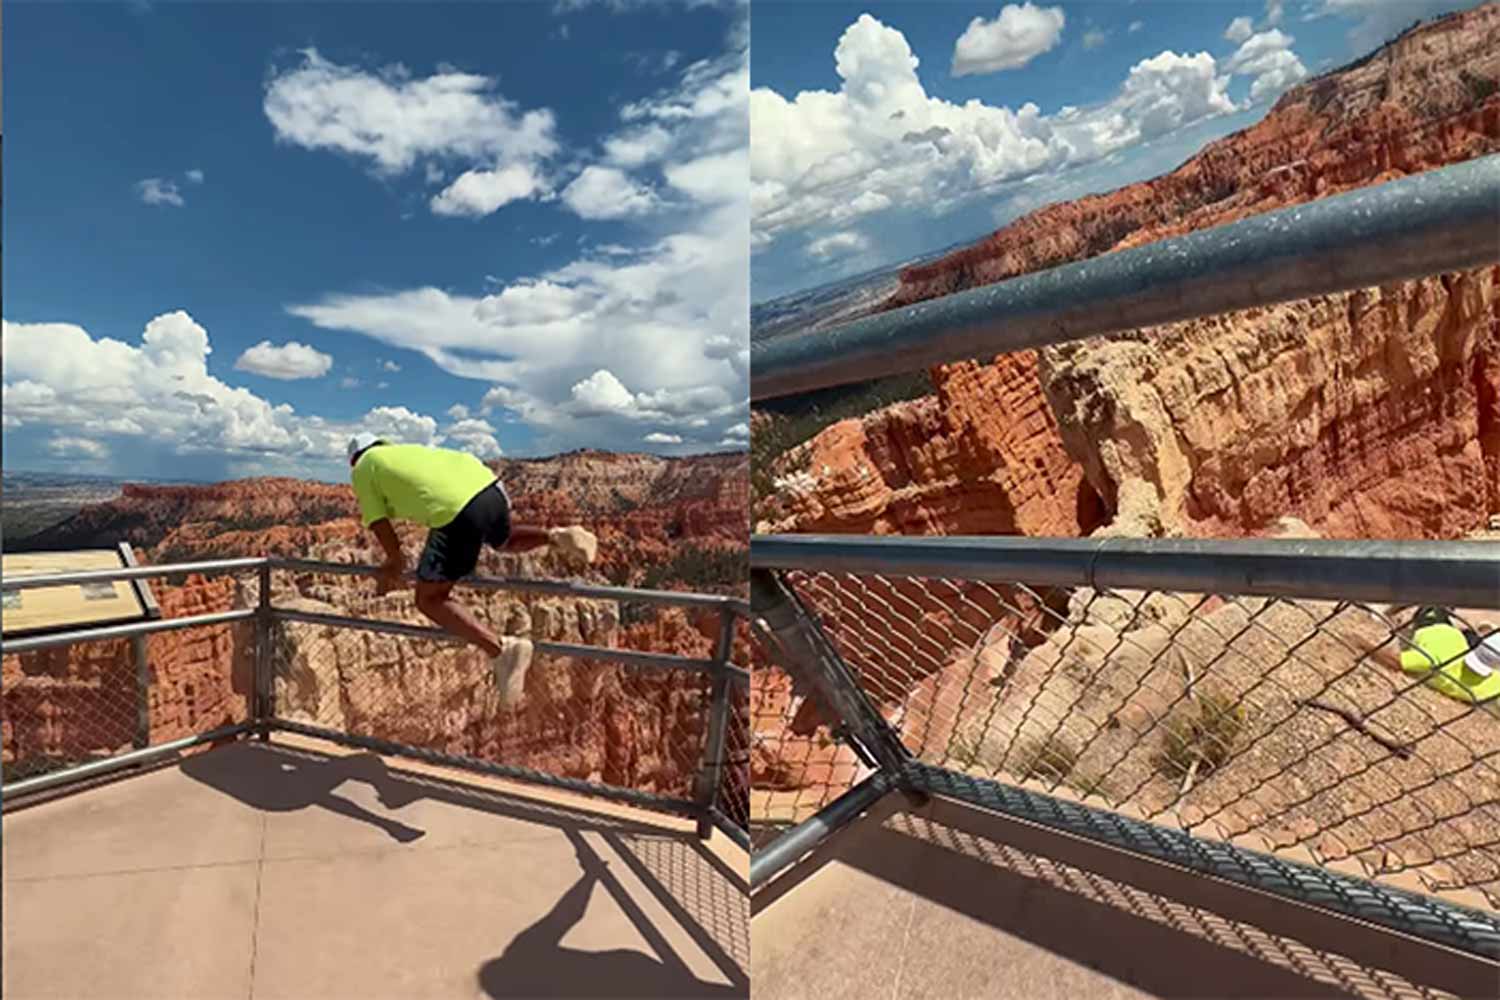 Russian Influencer’s Death Defying Grand Canyon Stunt Stuns